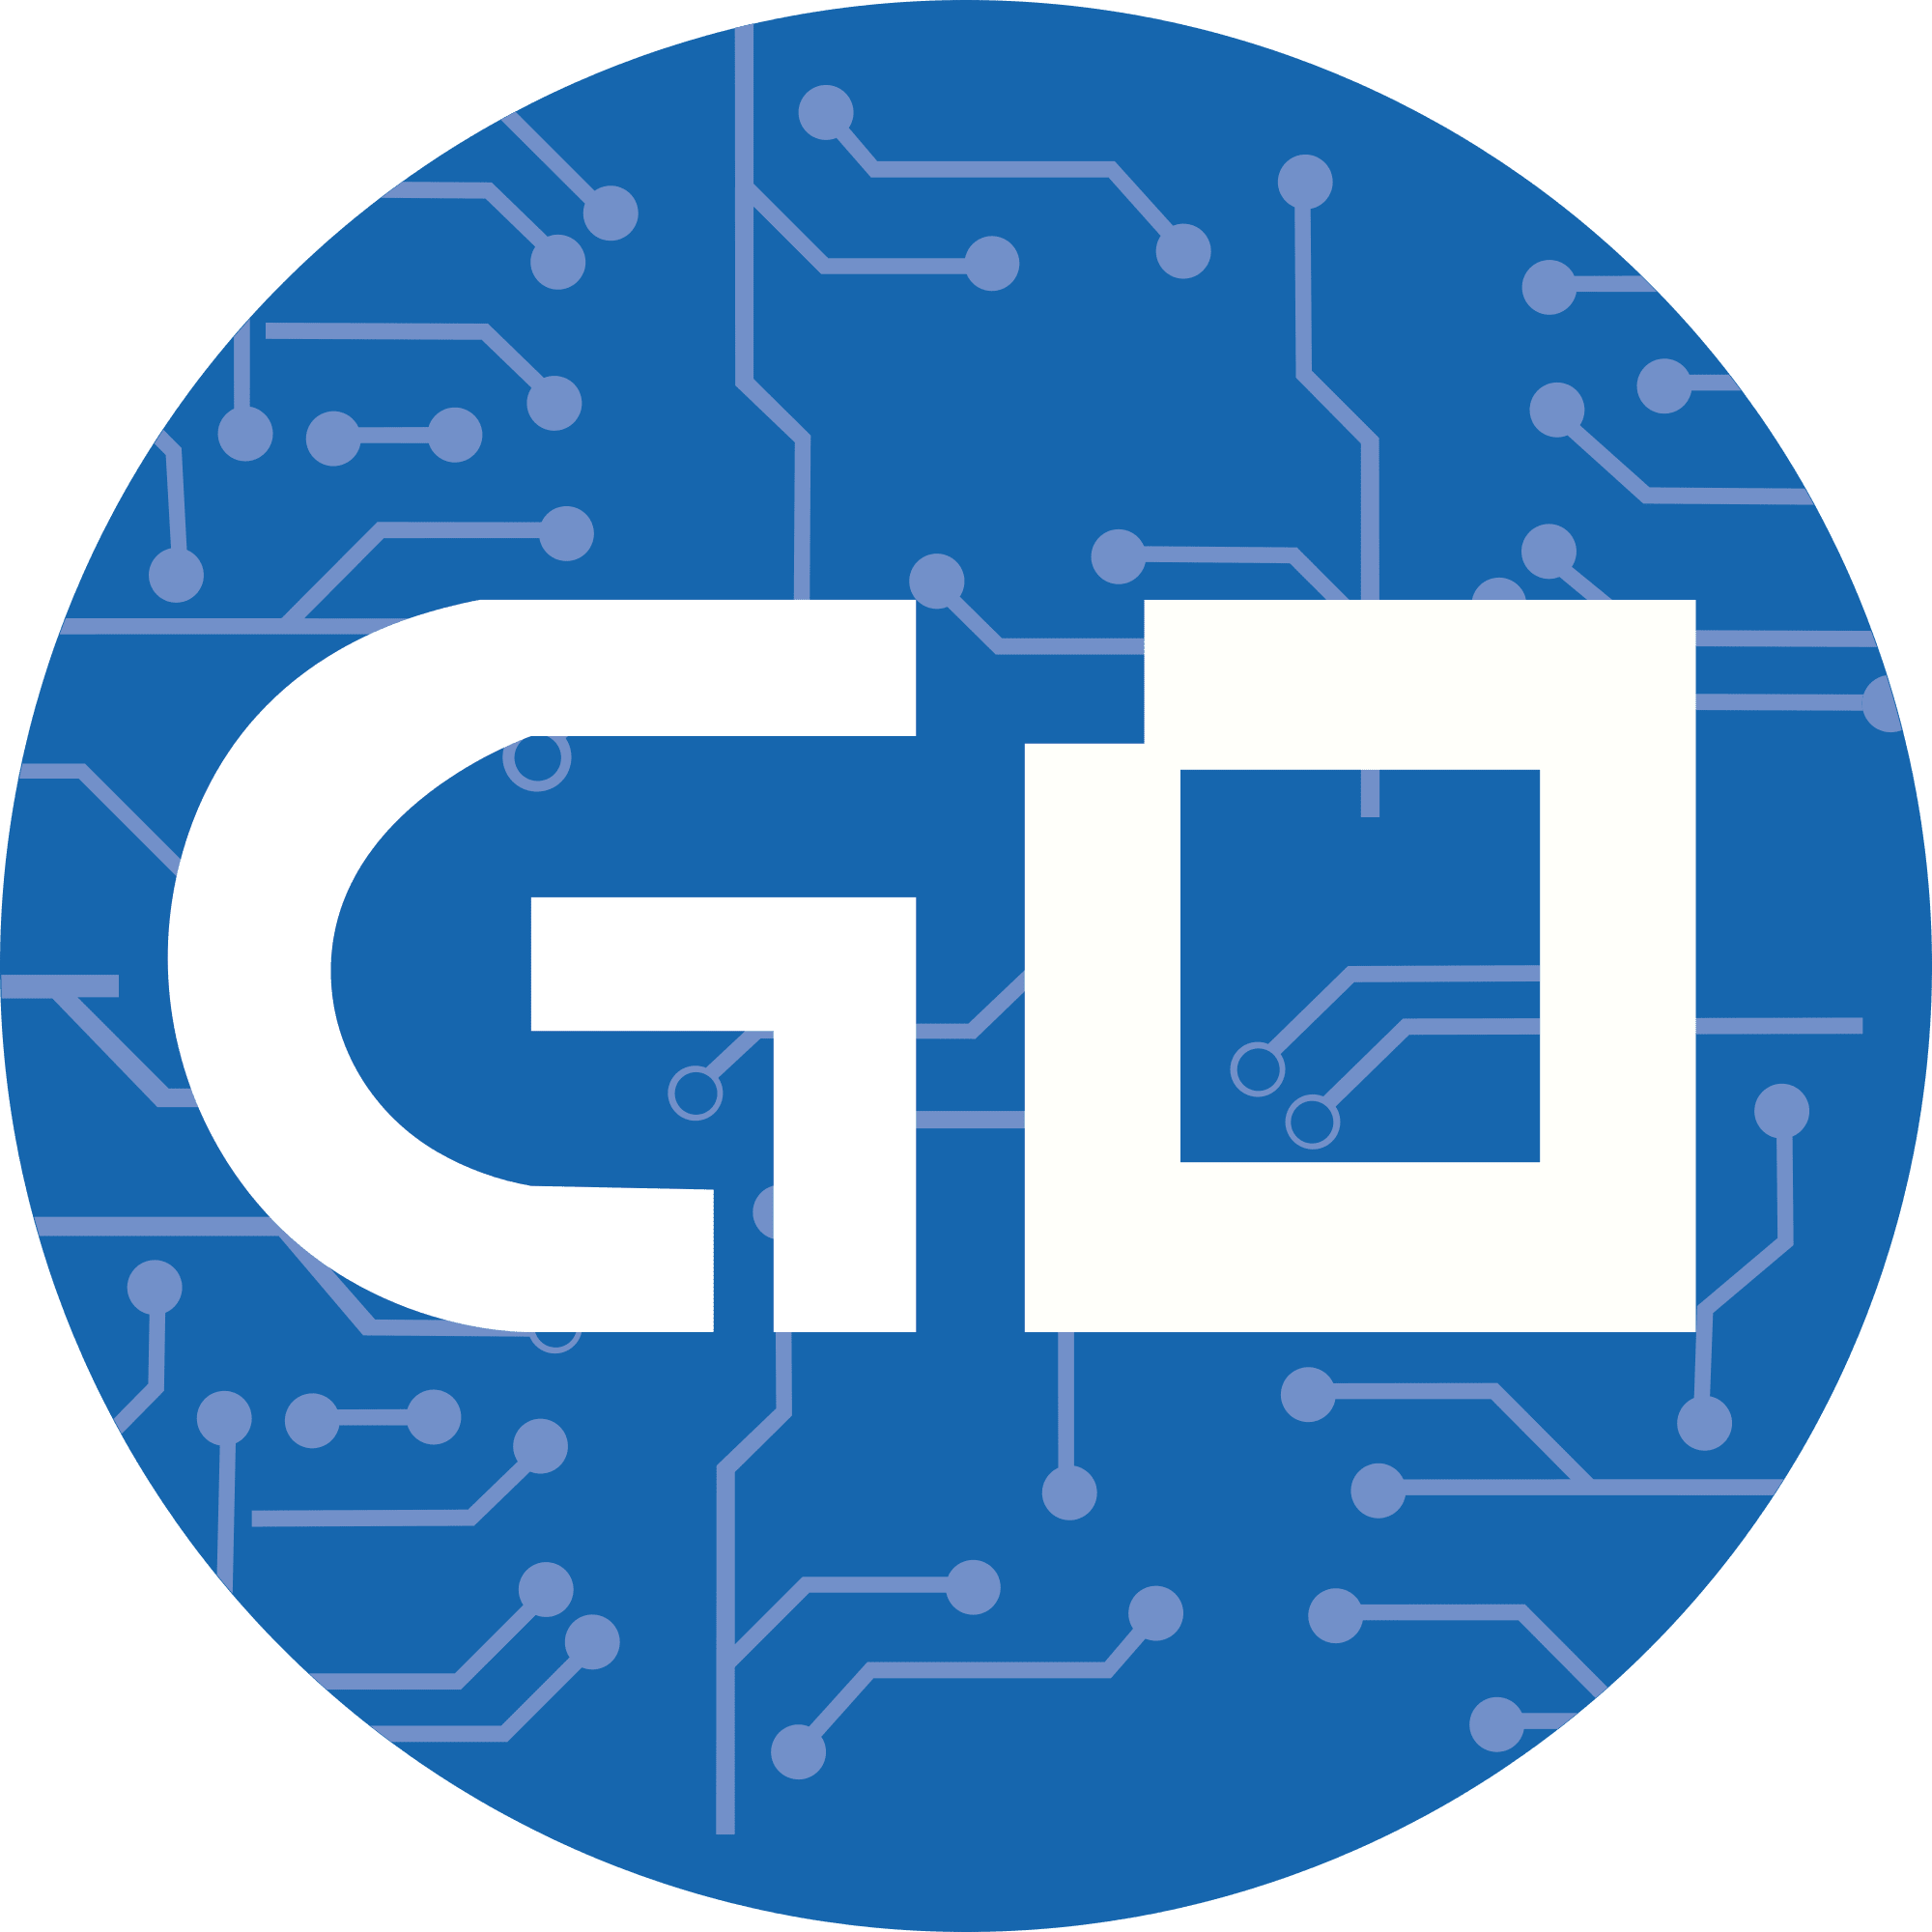 GoByte logo in png format